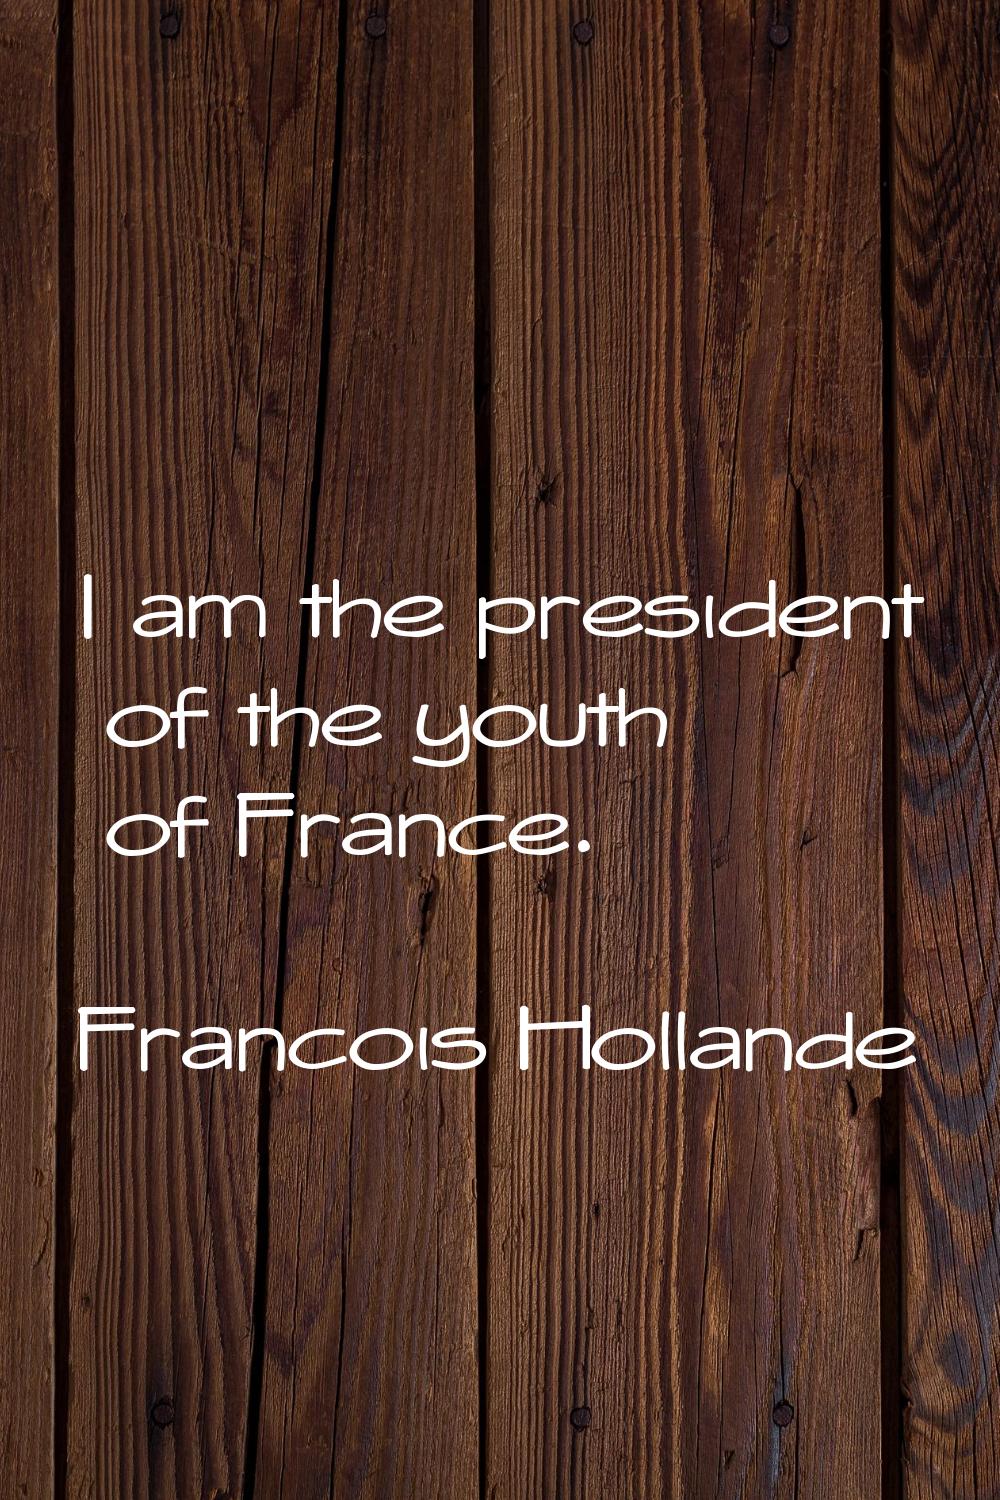 I am the president of the youth of France.